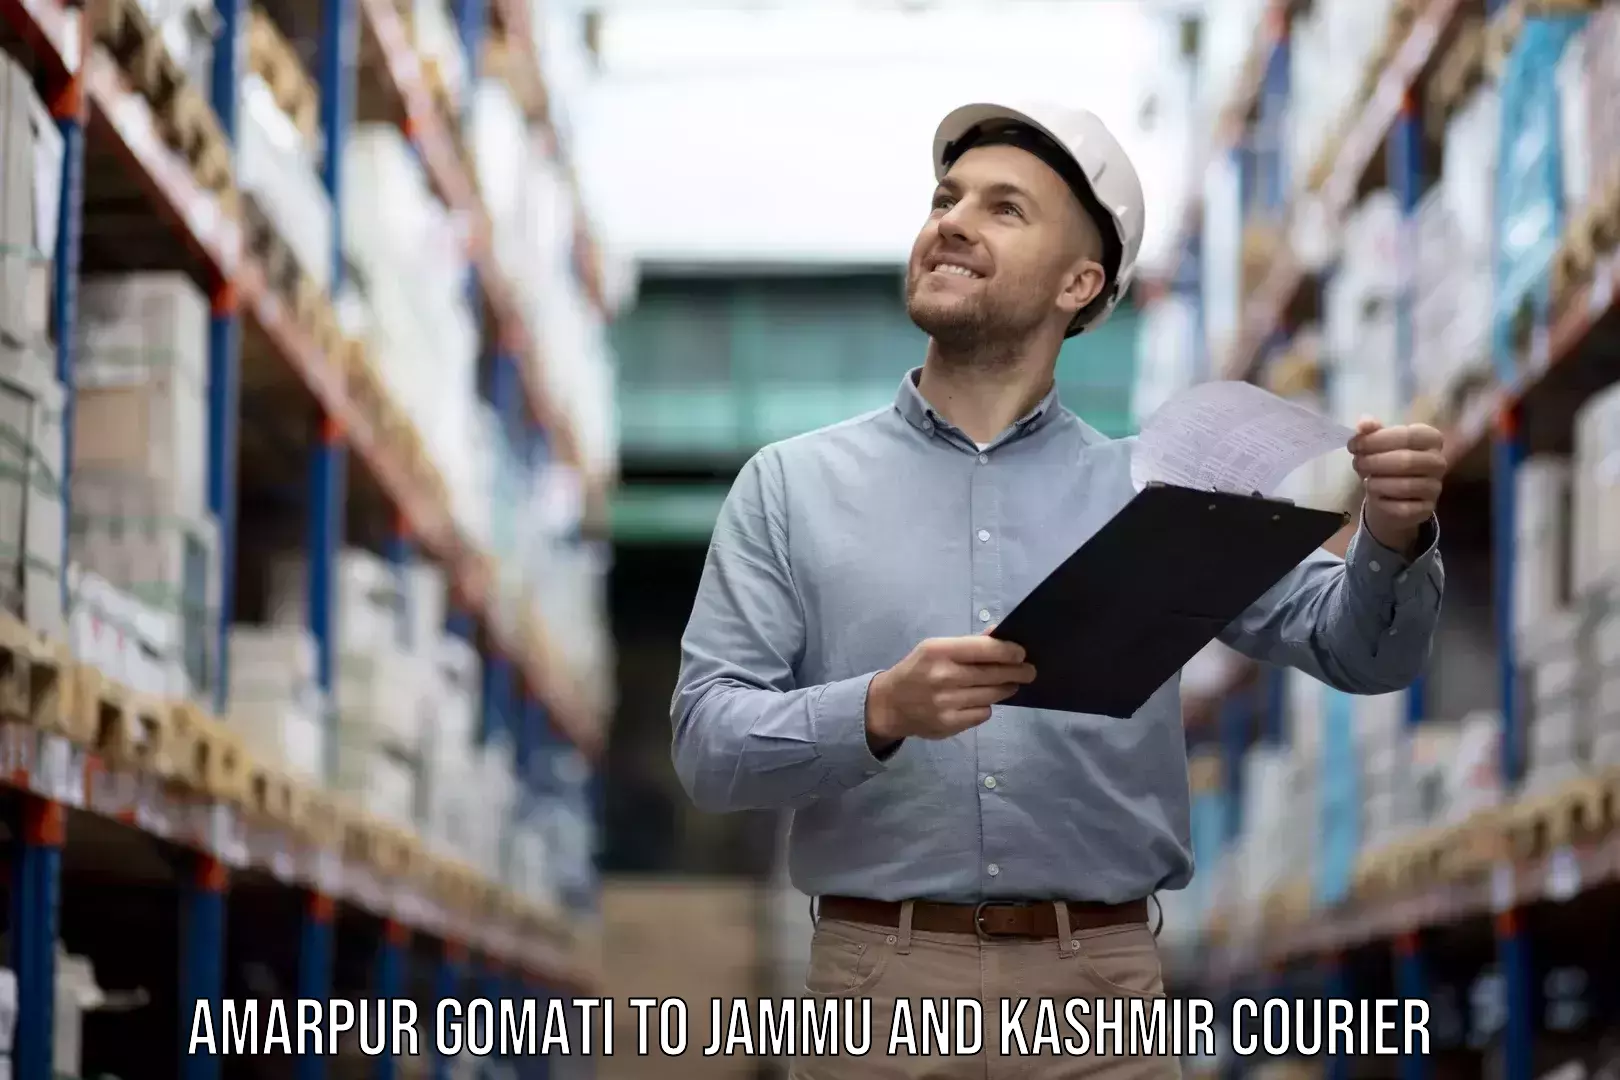 Specialized home movers Amarpur Gomati to University of Jammu